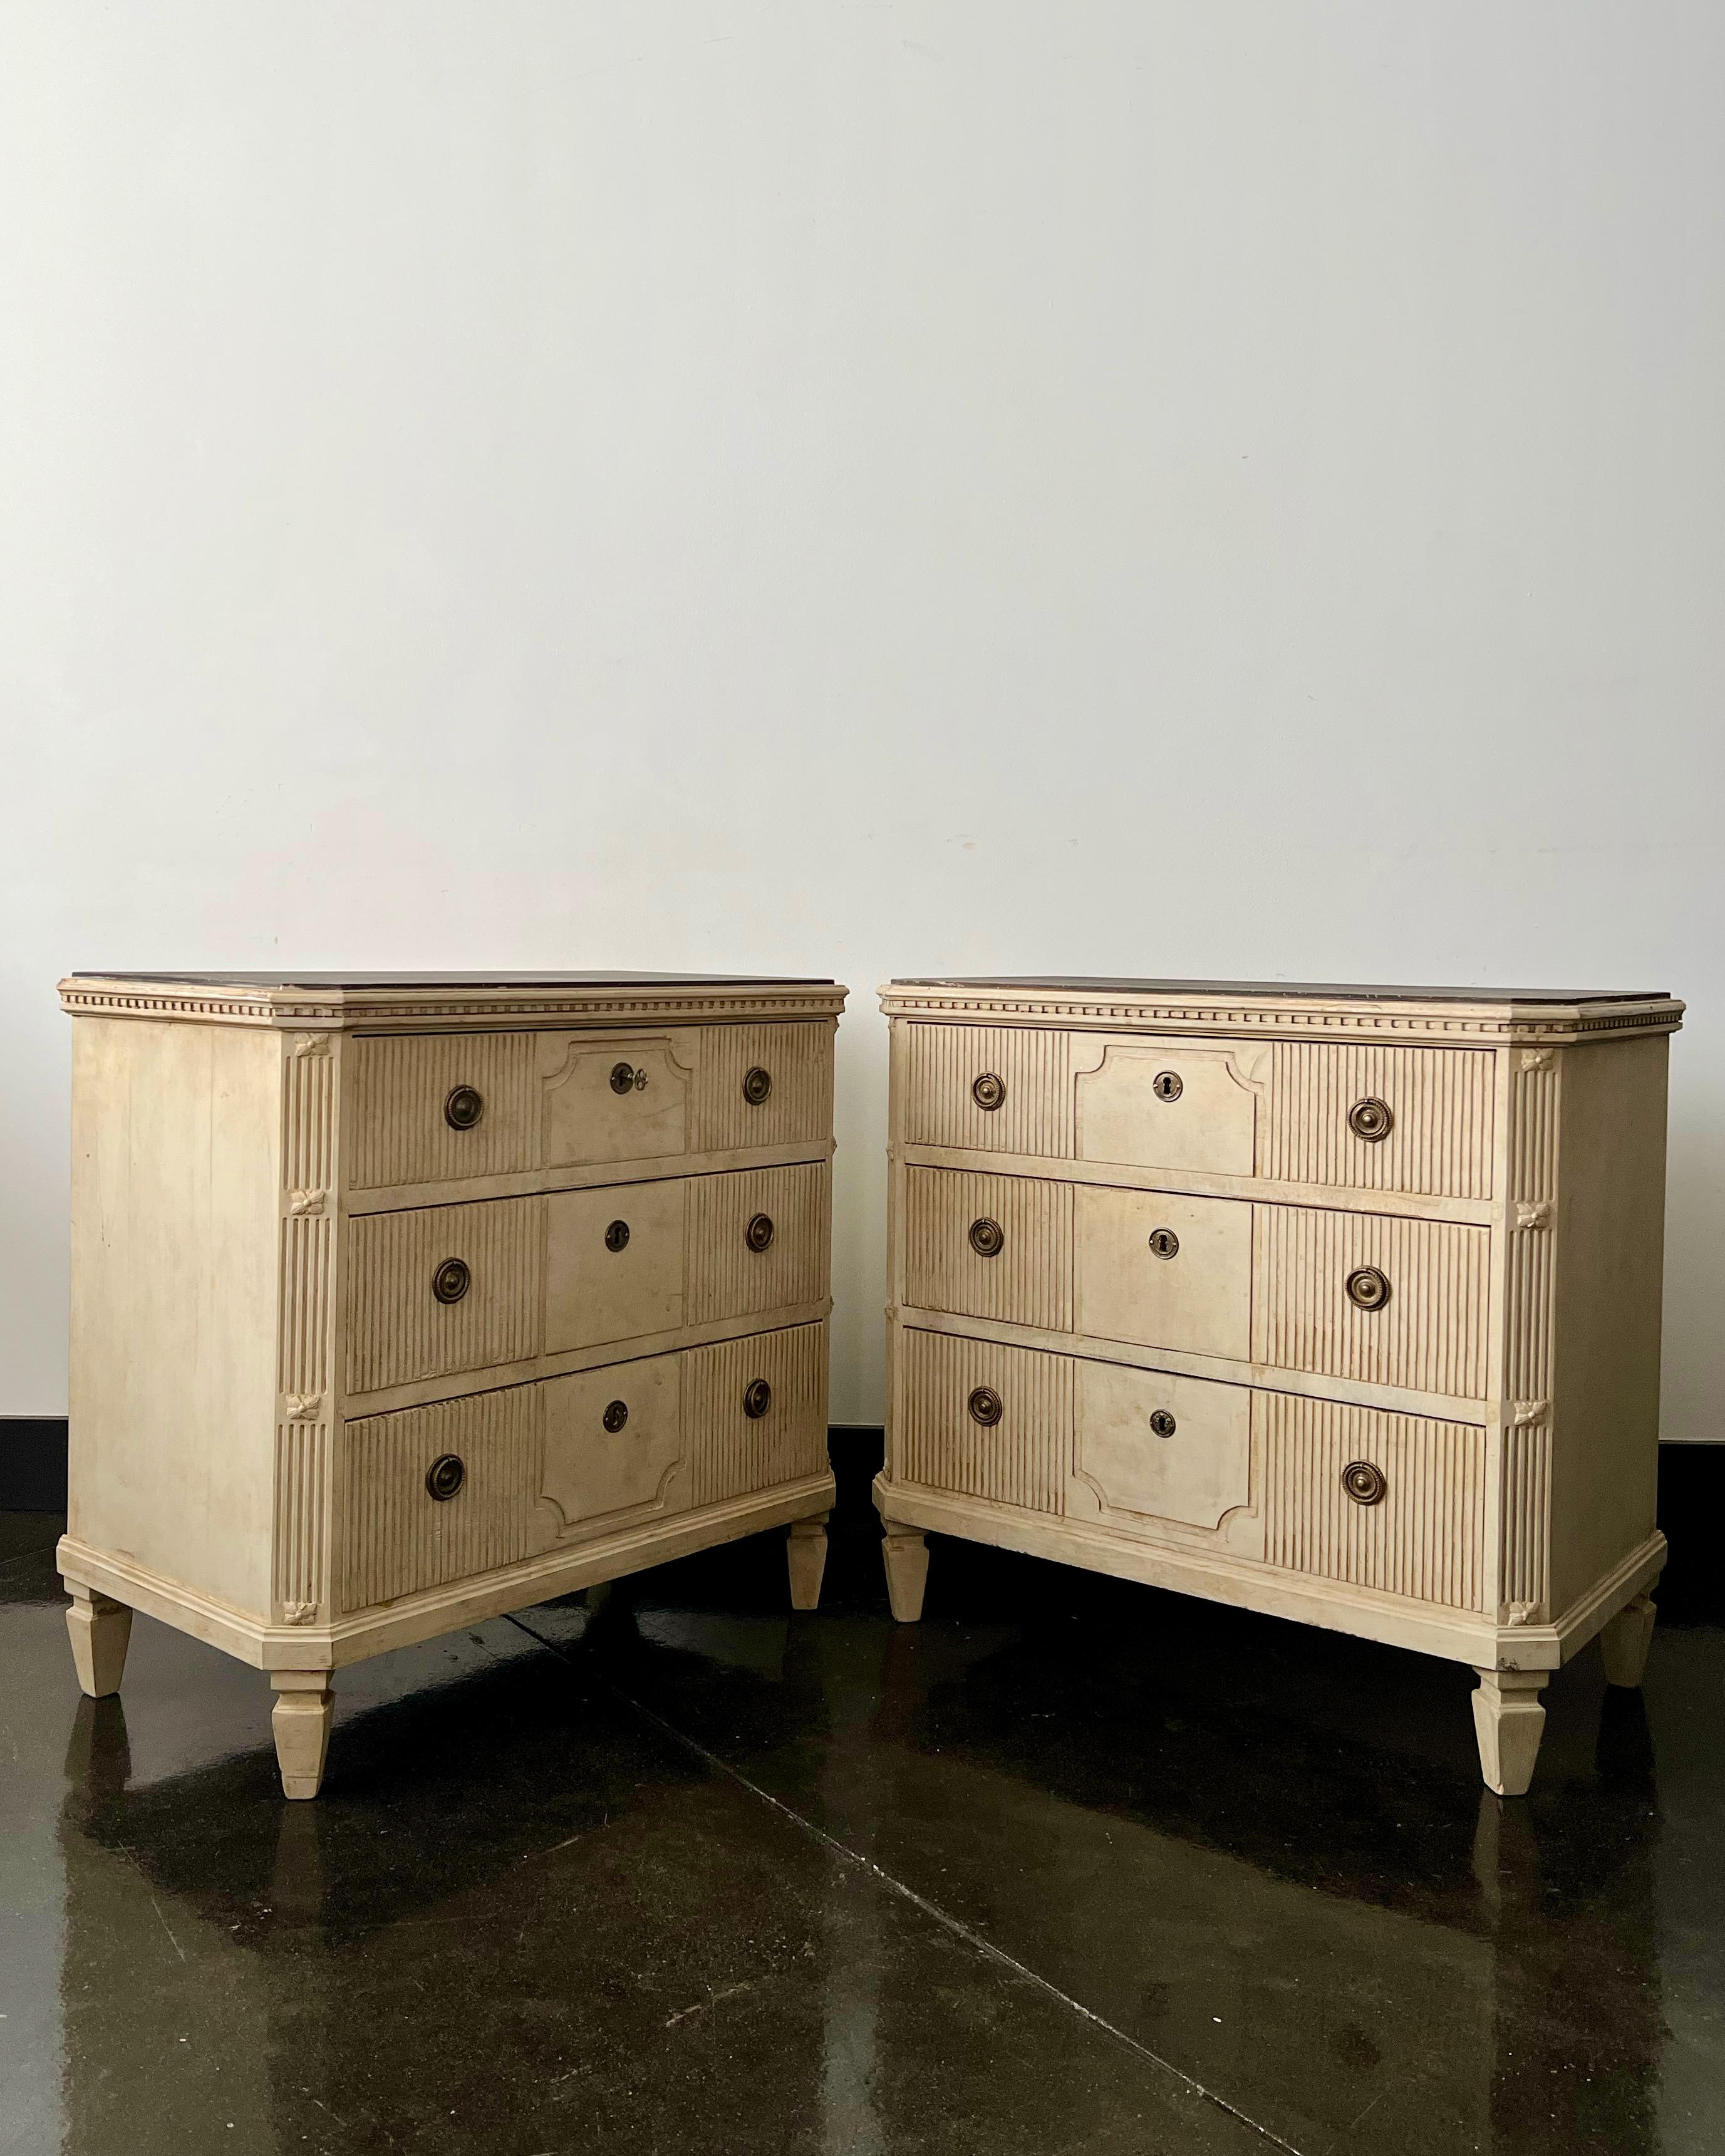 Pair of Swedish 19th century chest of drawers with three reeded drawer fronts, canted corner posts, handsome hardwares and dentil molding in cream color under the darker black/gray-shaped top,
Sweden, circa 1860.
Surprising pieces and objects,